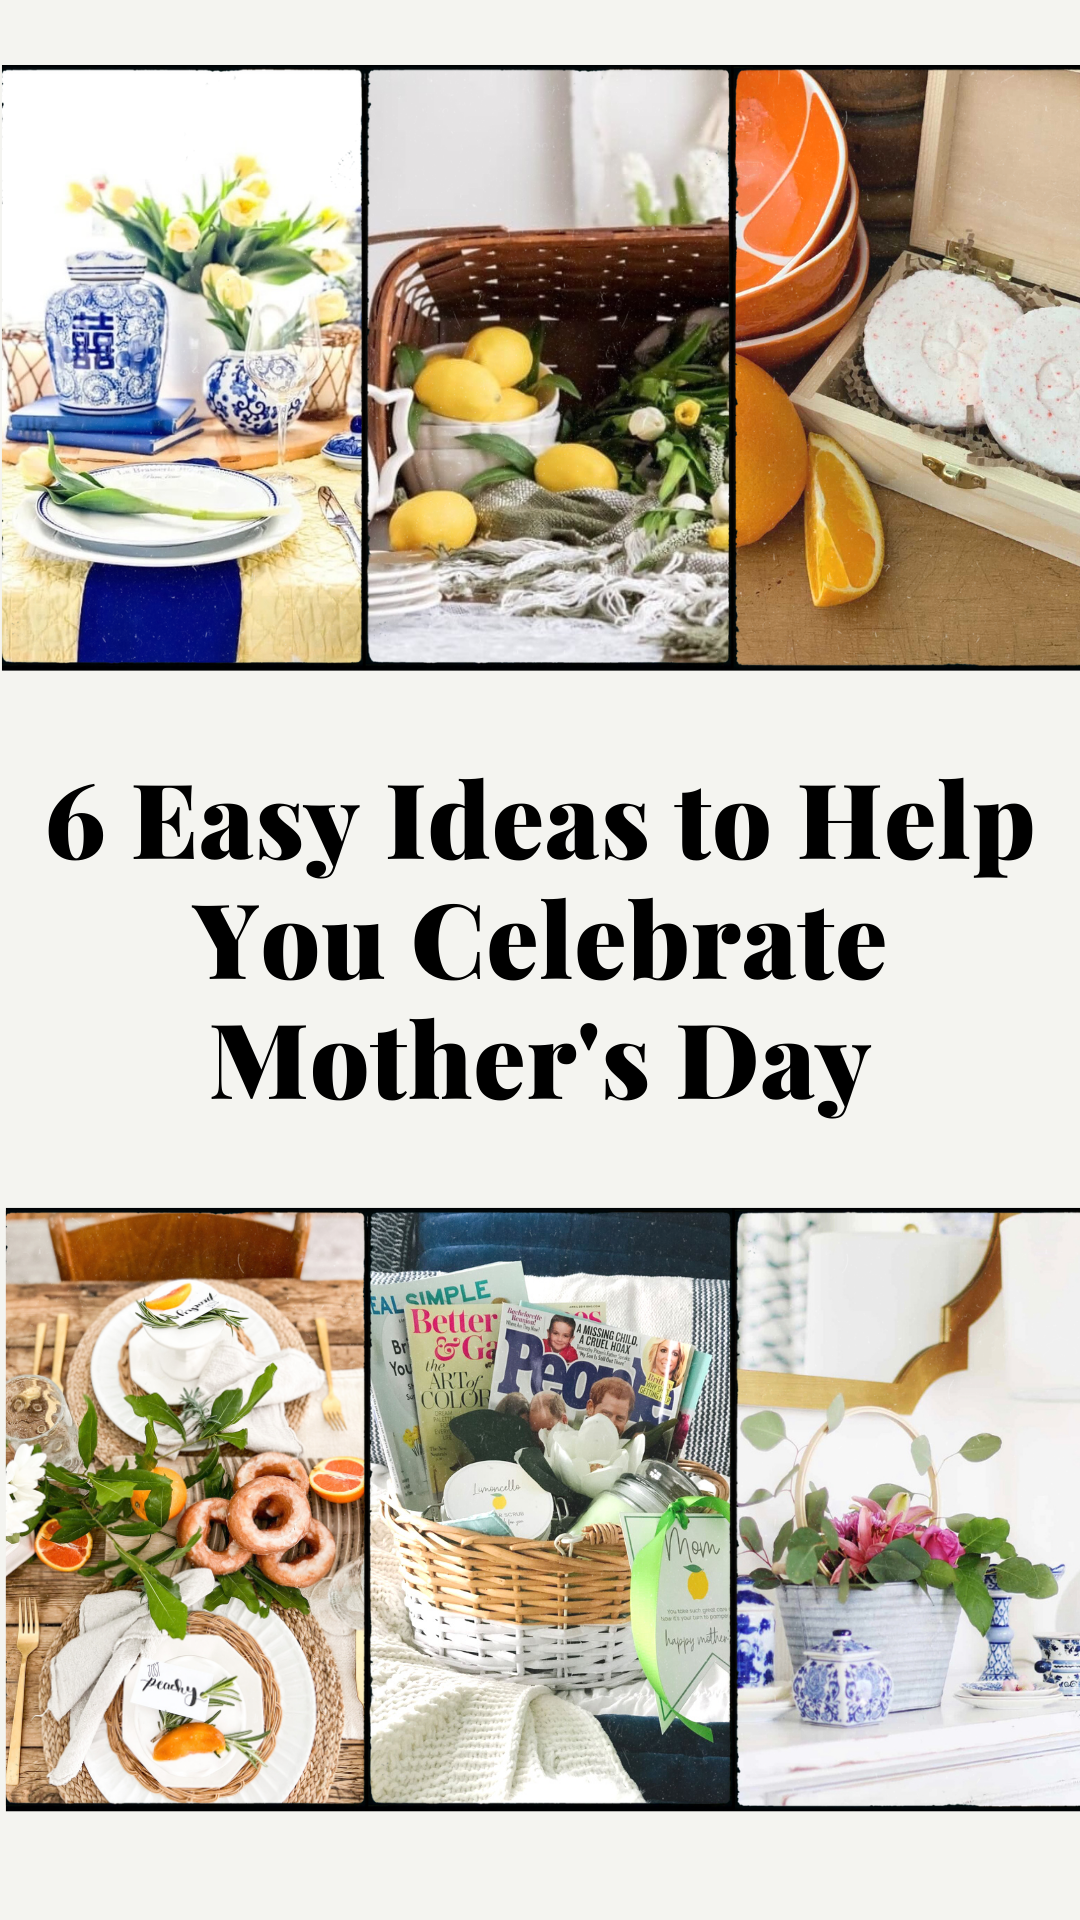 6 of the Most Beautiful Ways to Help You Celebrate Mother’s Day